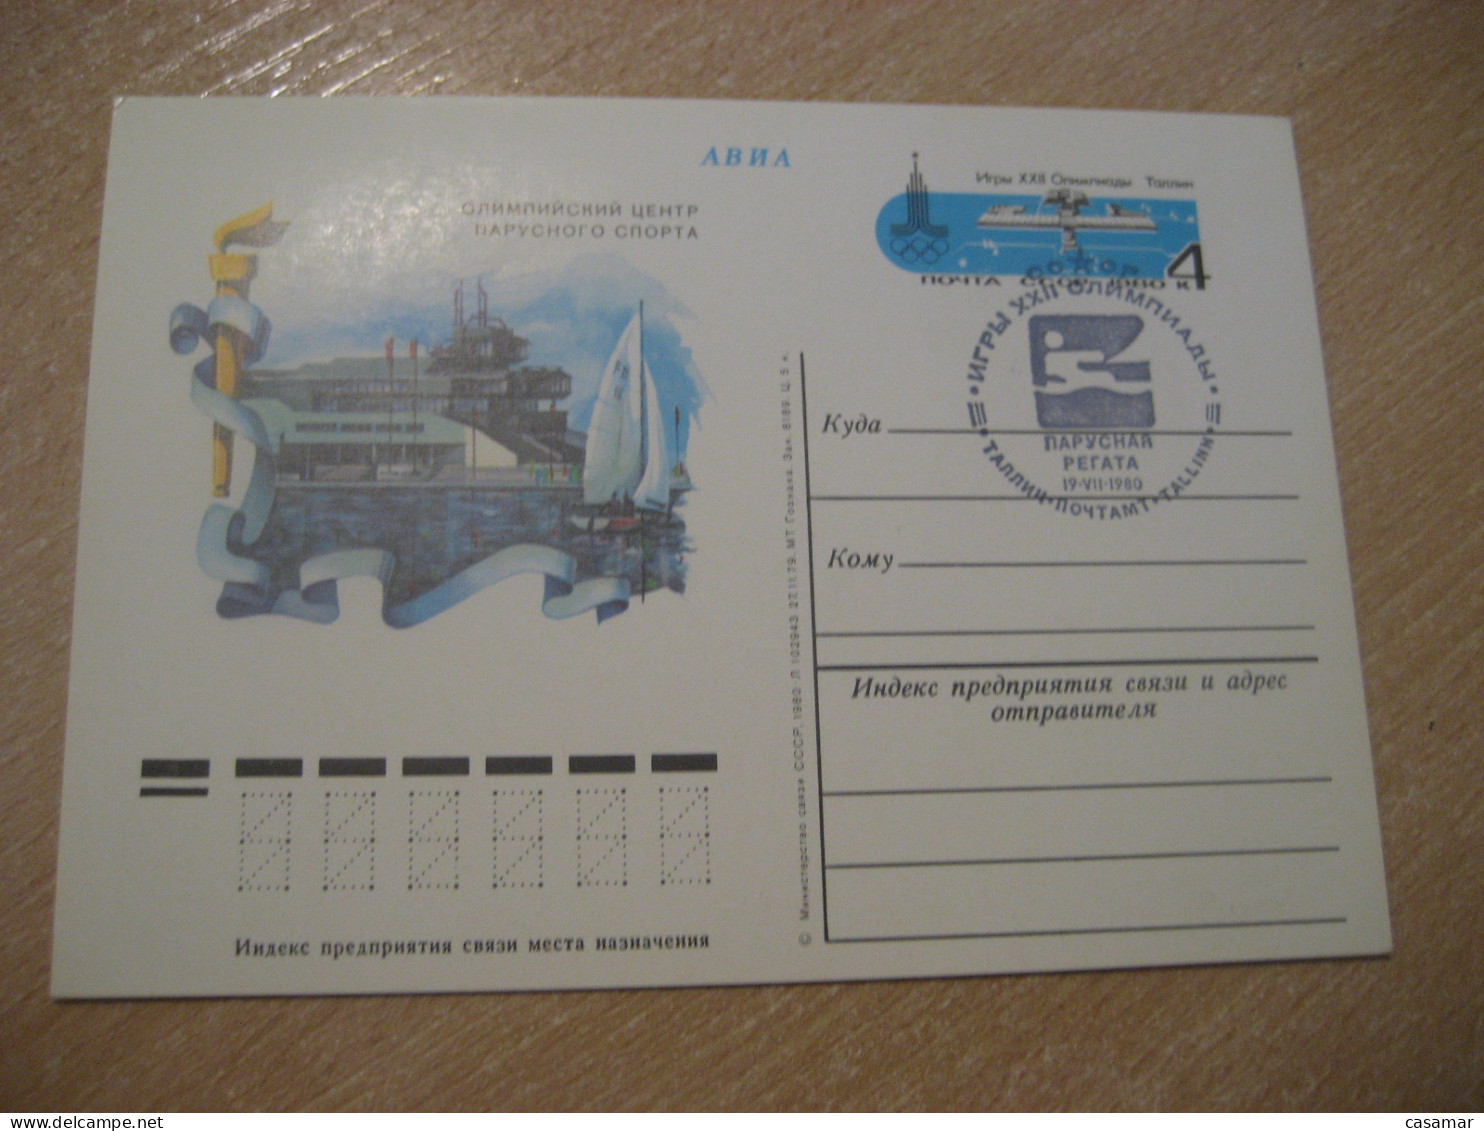 TALLINN 1980 Sail Sailing Moscow Olympic Games Olympics Torch Cancel Postal Stationery Card RUSSIA USSR - Summer 1980: Moscow